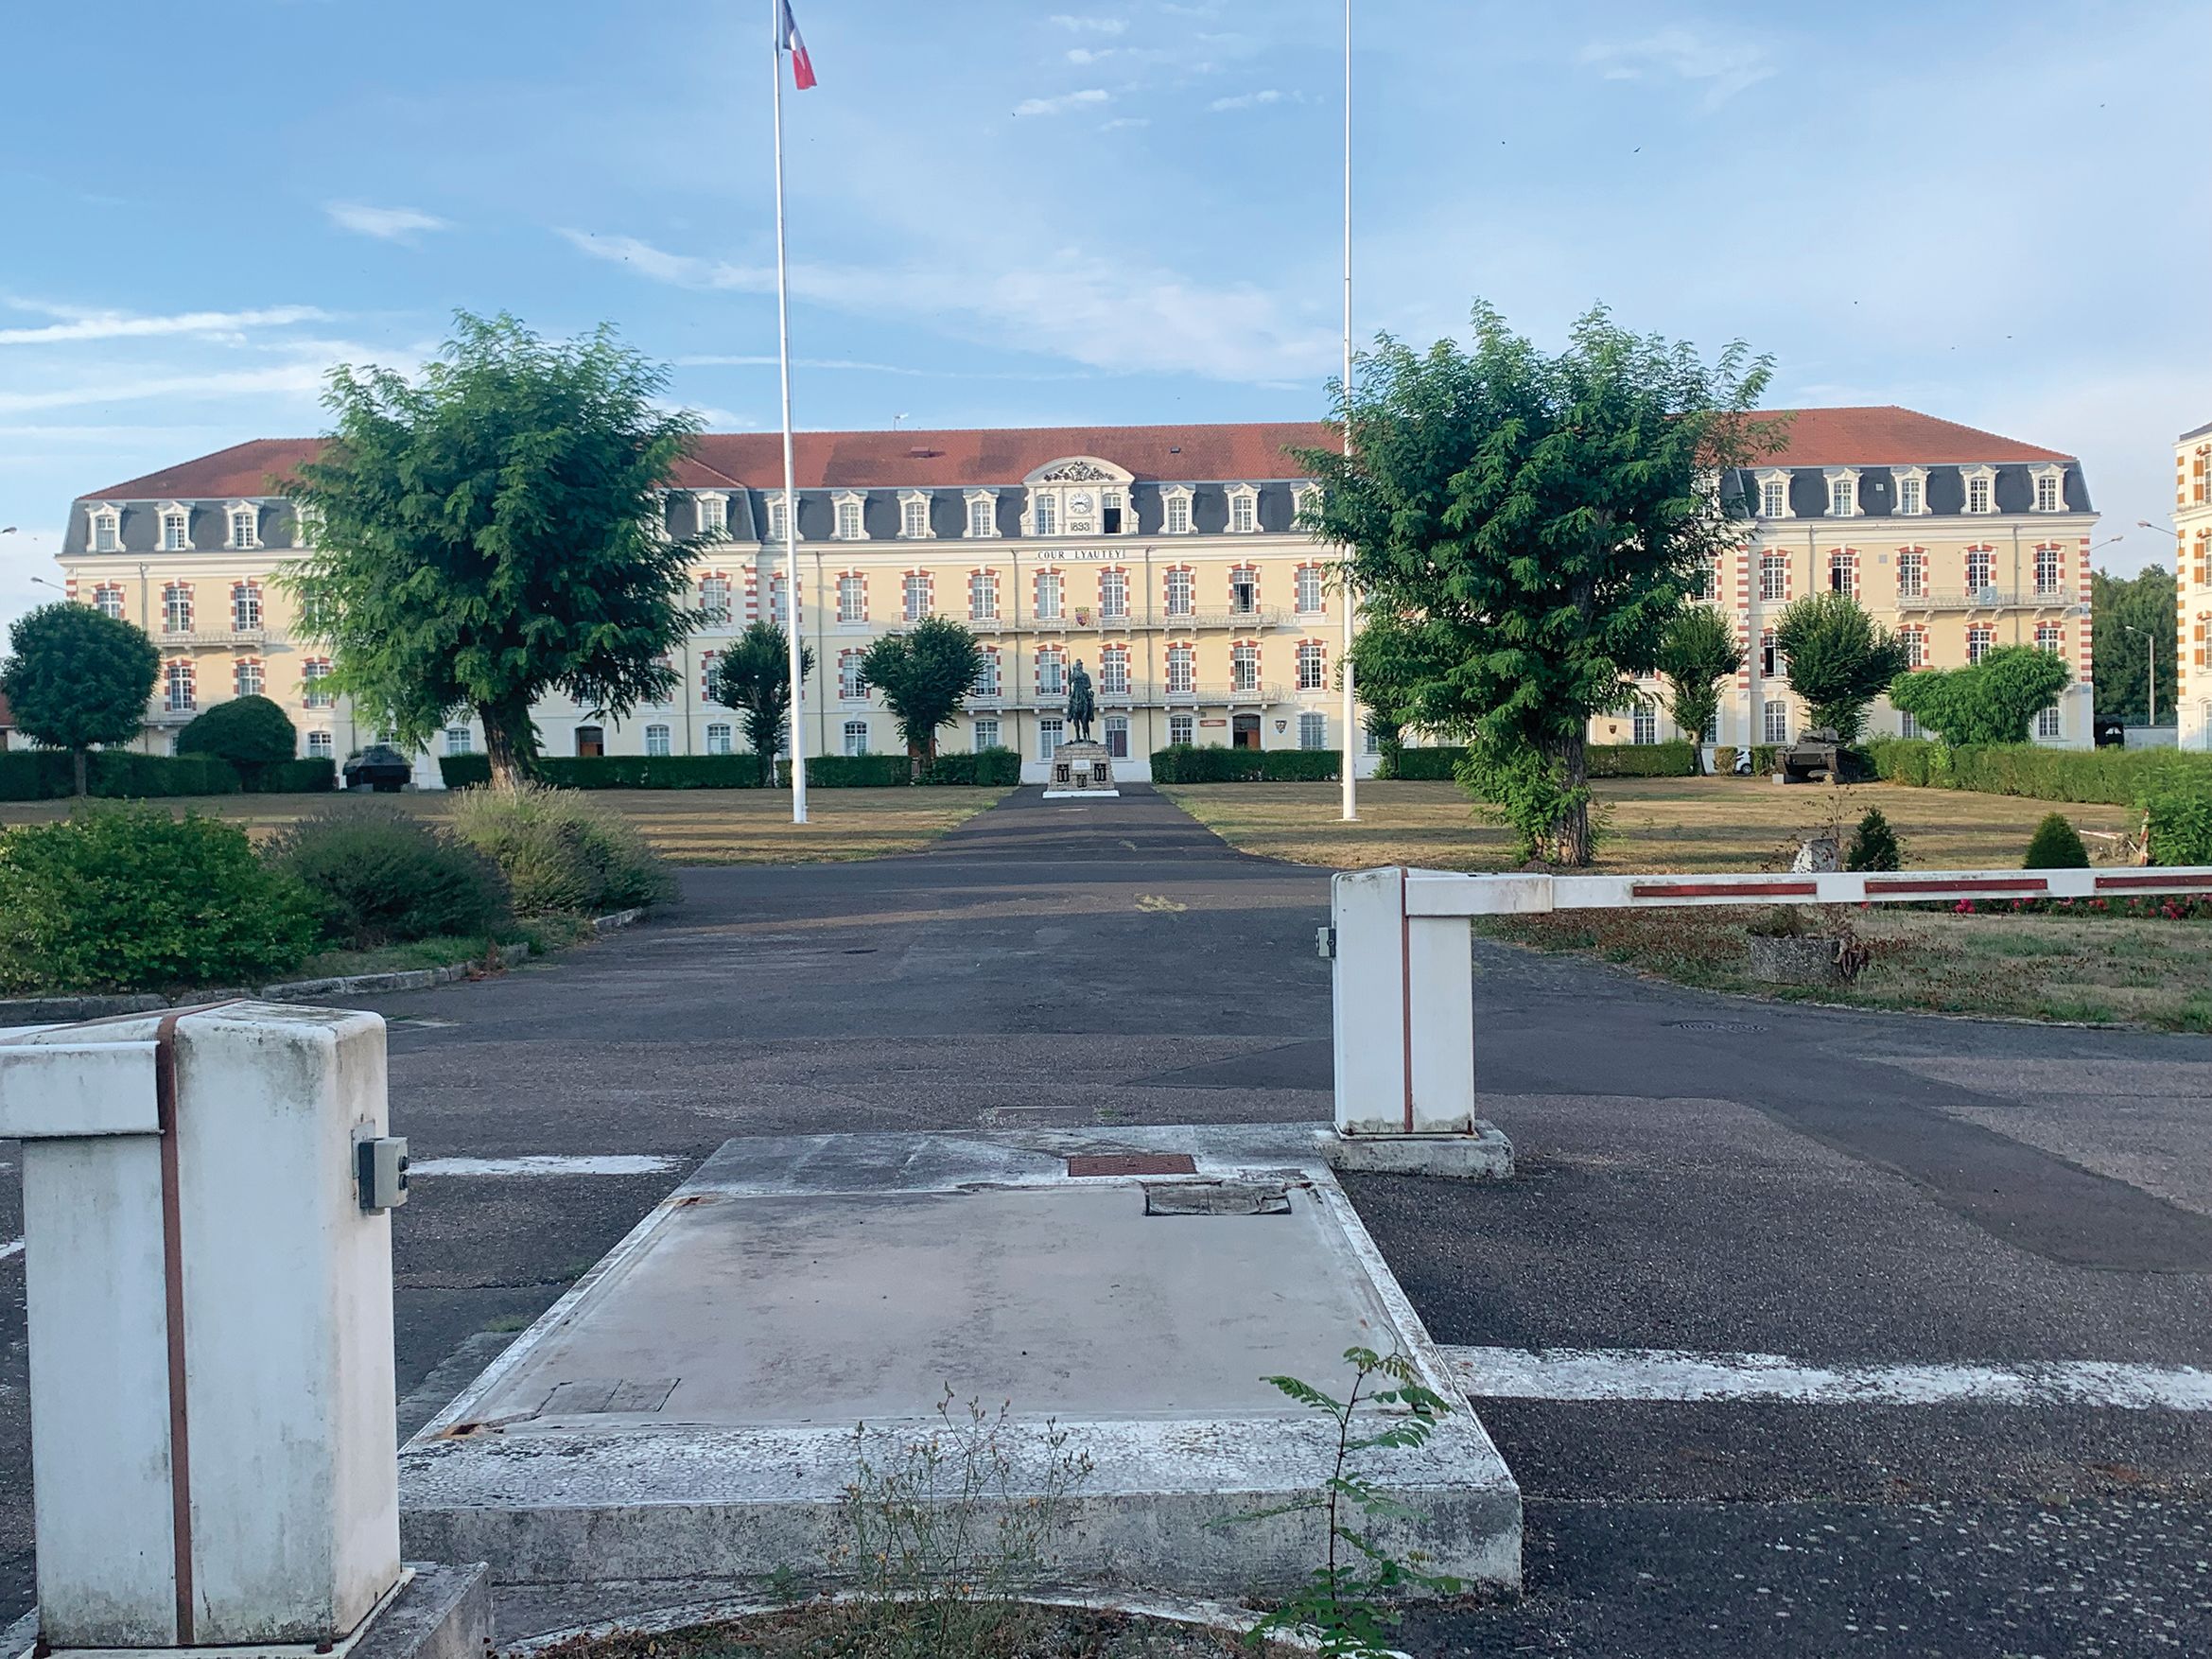 Verdun headquarters (Caserne de Jardin-Fontaine), of Lieutenant General Omar Bradley, commander of 12th Army Group, where the “Bulge conference” took place on December 19, 1944. Today, the barracks building is still used by the French army.